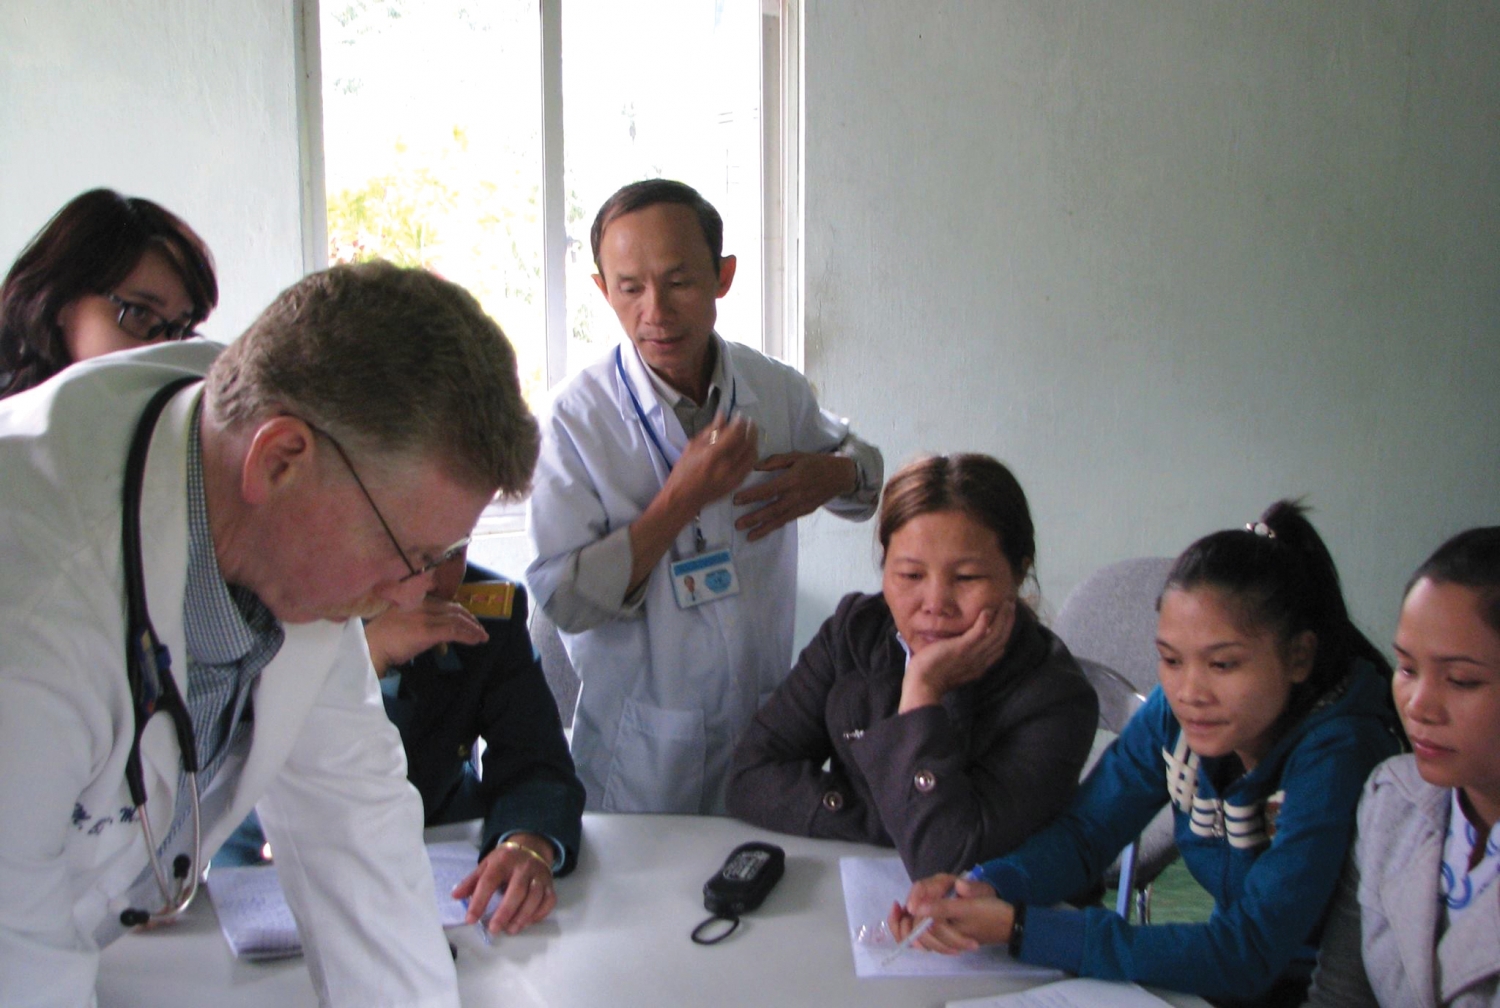 a group of nurses and a doctor working together at a table.